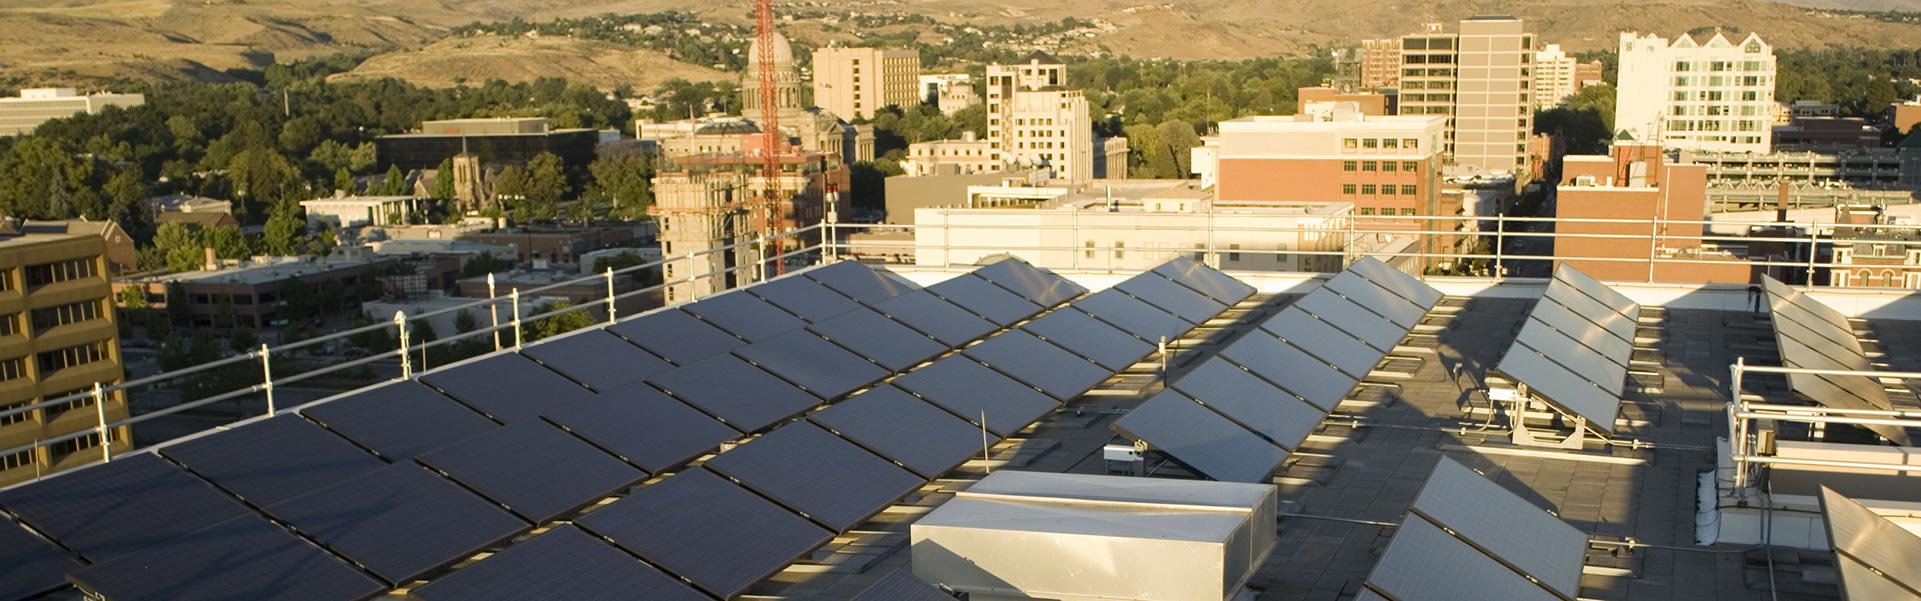 Image of solar panels on the roof of Idaho Power's corporate headquarters